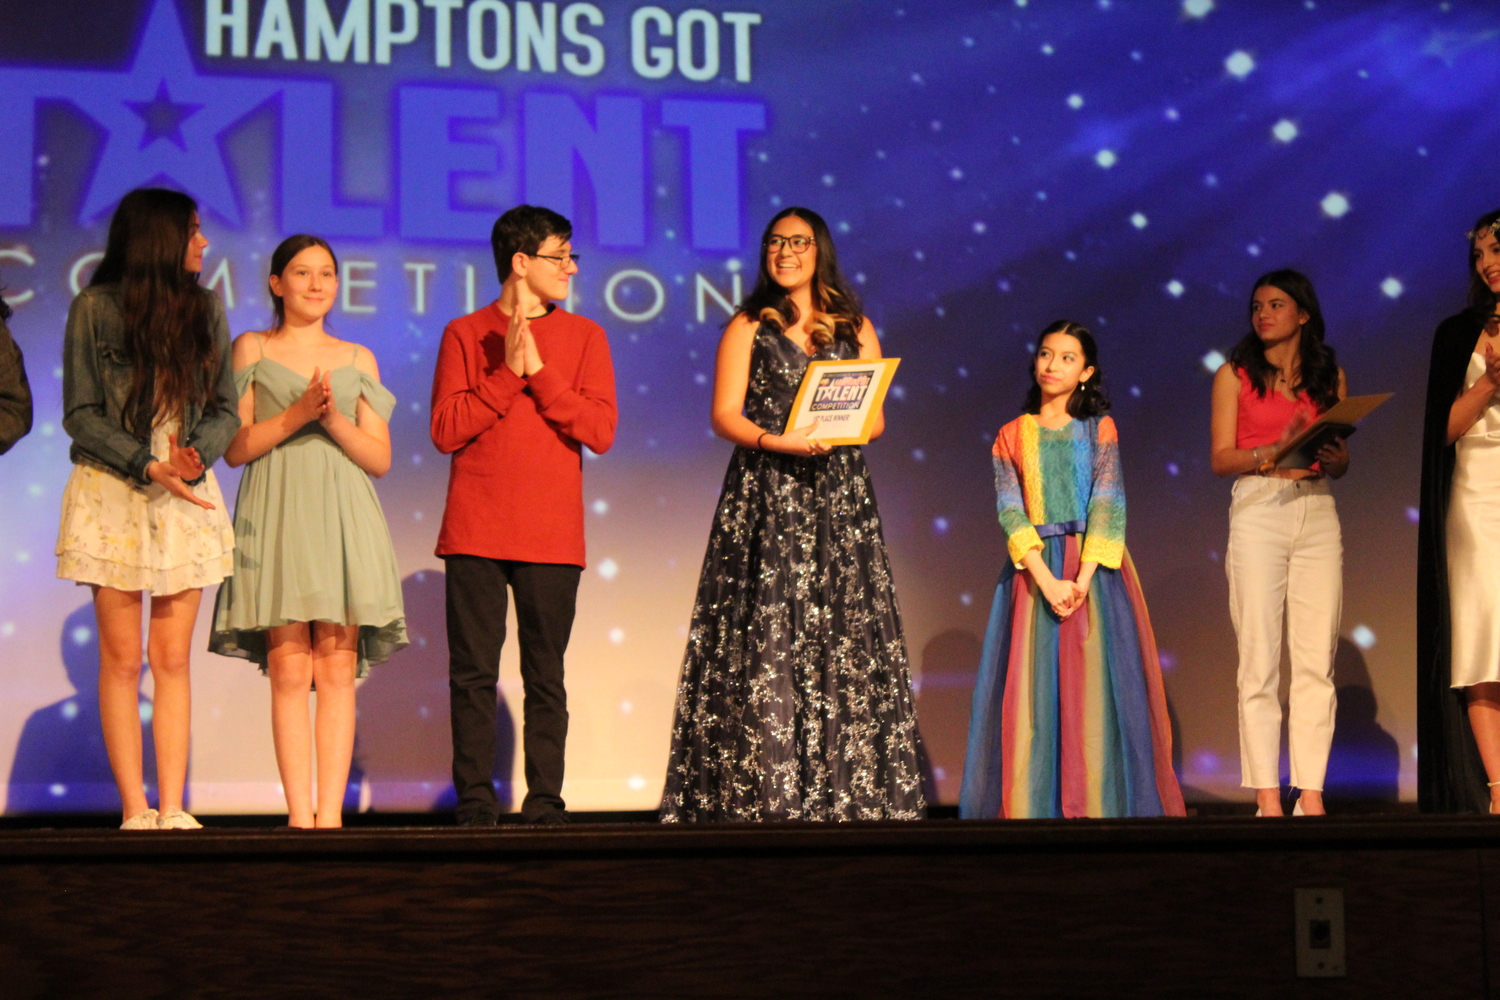 Hampton Bays High School ninth-grader Gimena Valdespino placed first in the Southampton Town Youth Bureau's Hamptons Got Talent  competition last weekend. COURTESY SOUTHAMPTON TOWN YOUTH BUREAU